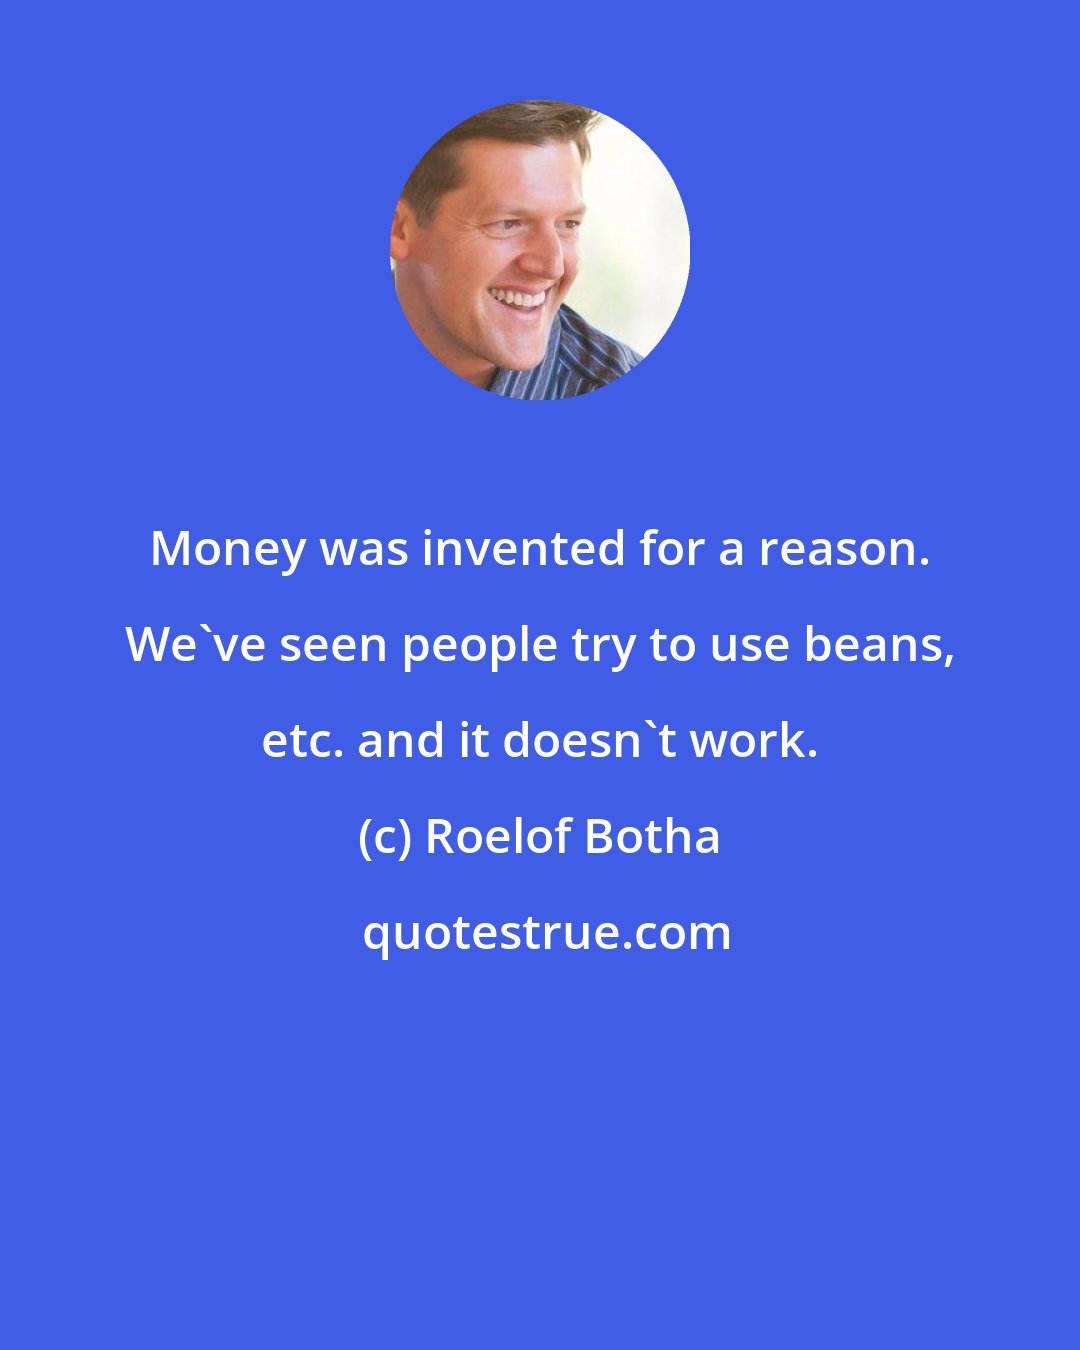 Roelof Botha: Money was invented for a reason. We've seen people try to use beans, etc. and it doesn't work.